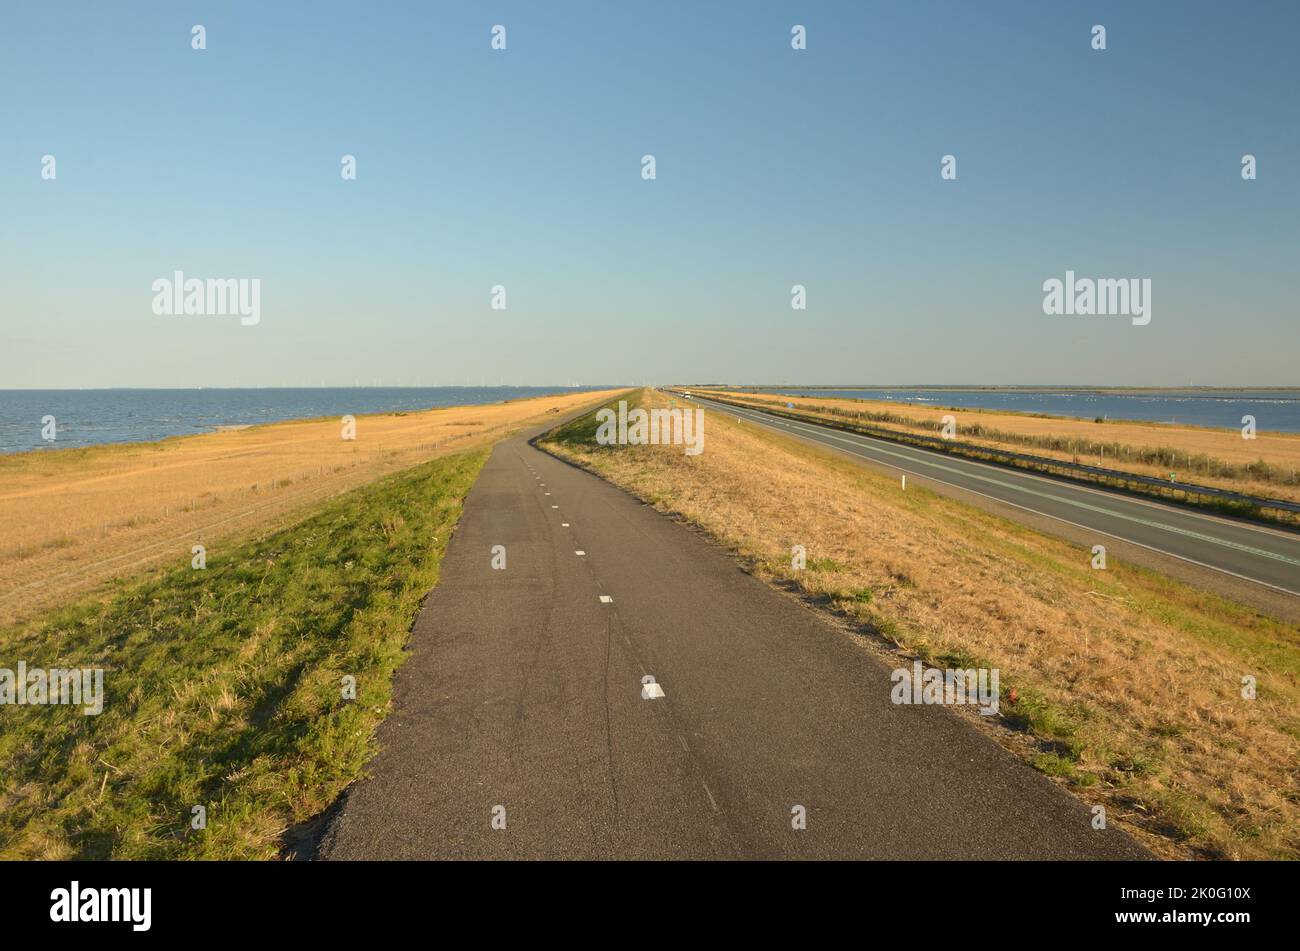 The cycle route along the 27km long Houtribdijk causeway in the Netherlands Stock Photo